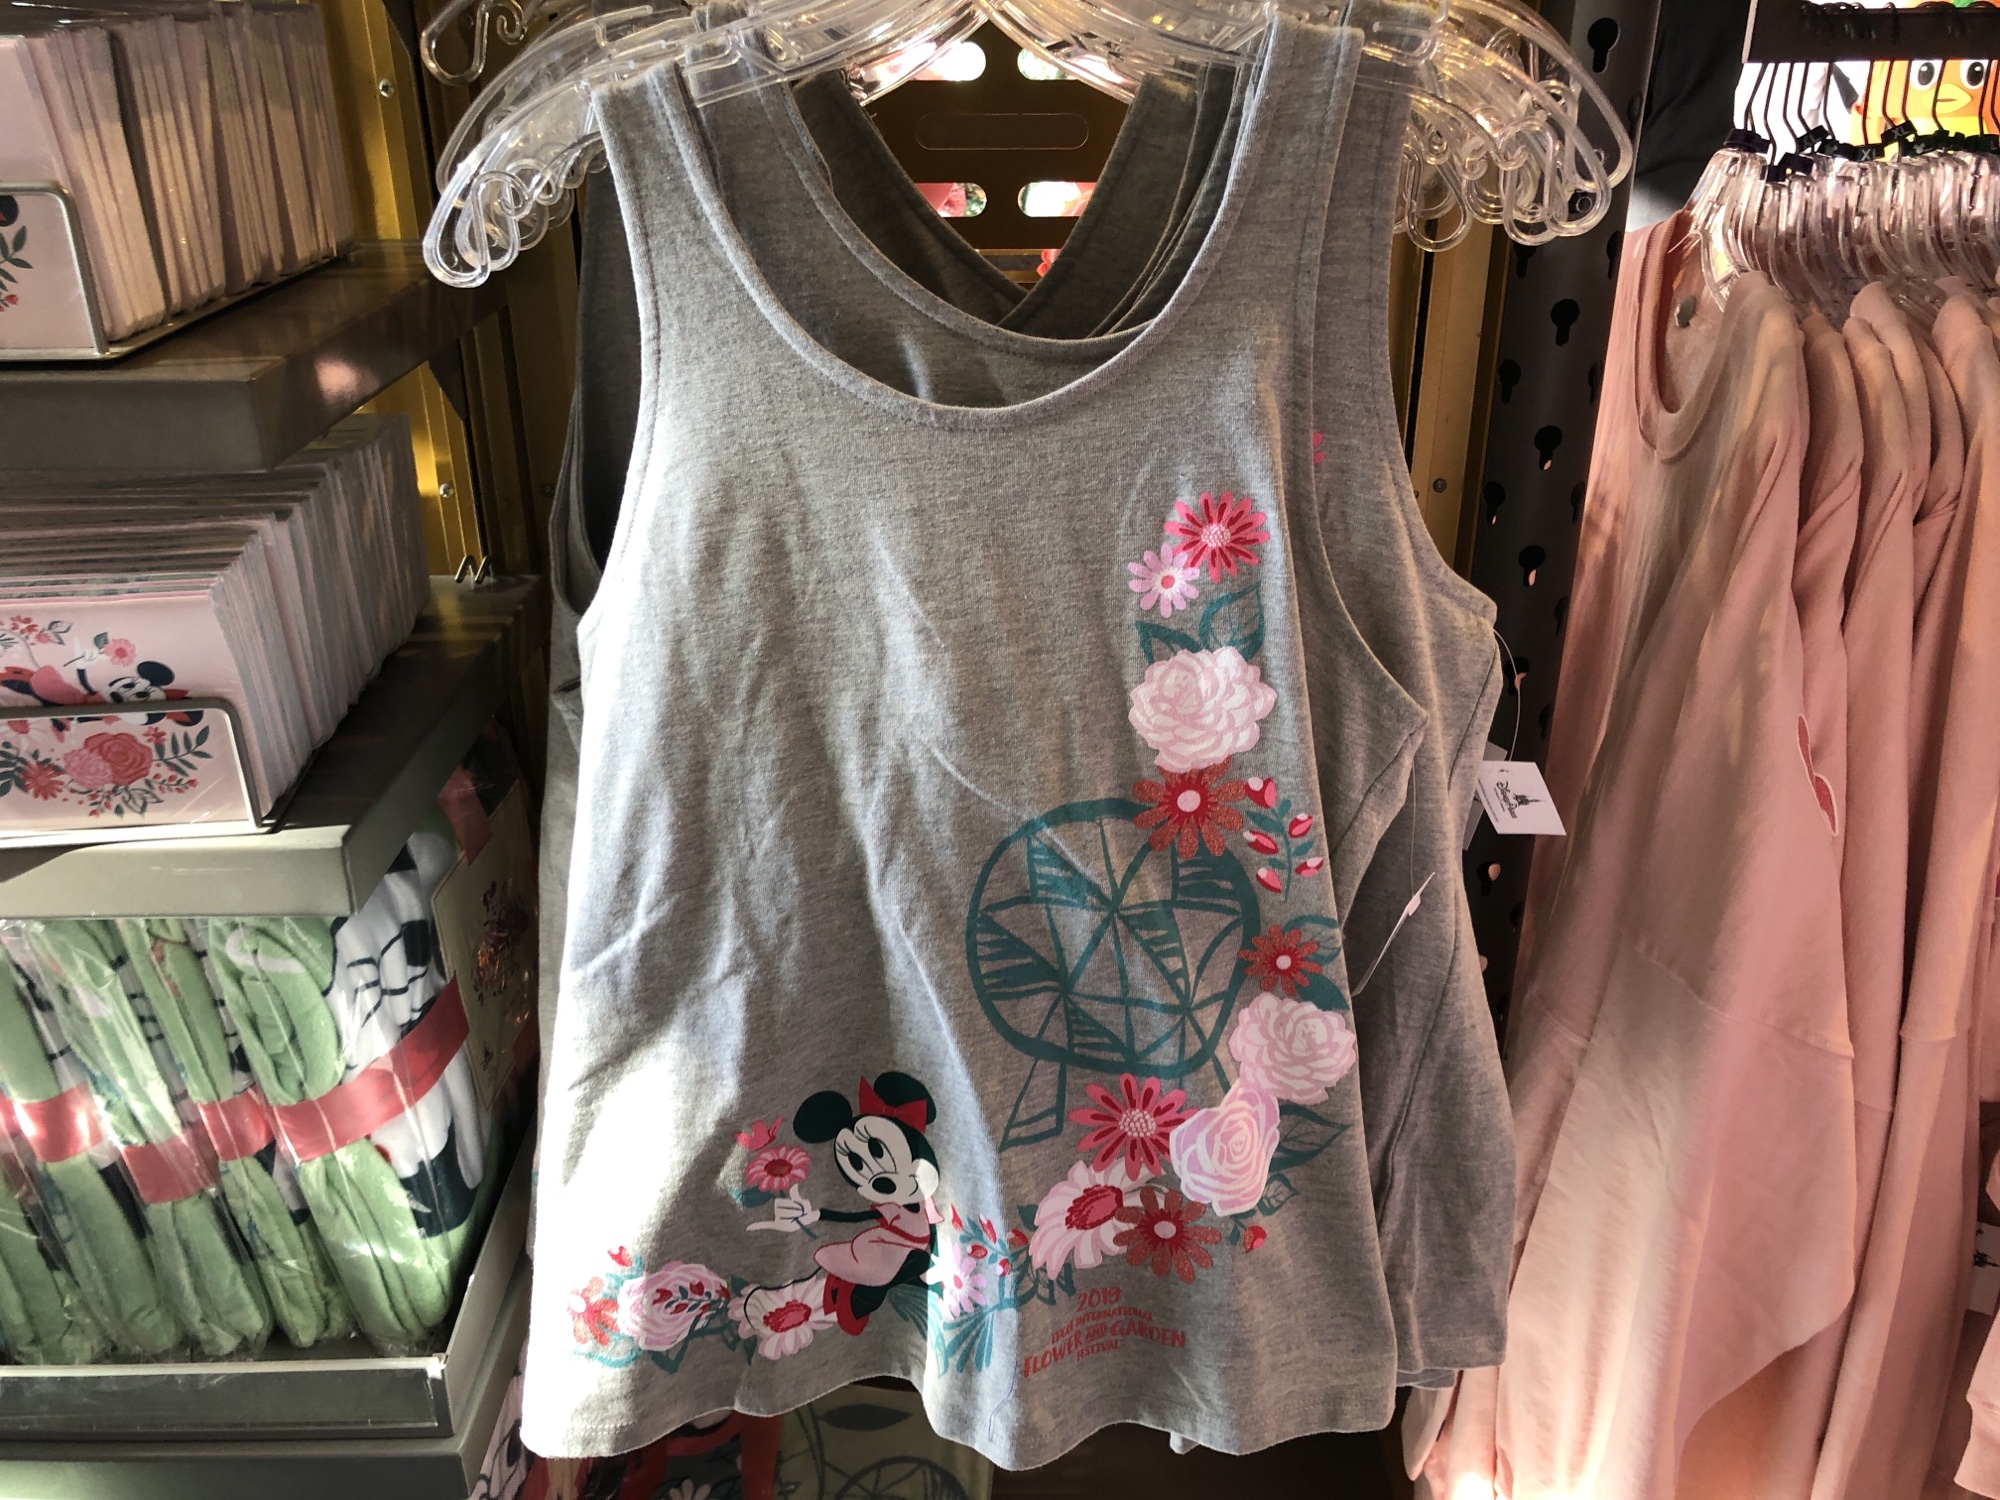 photos: 2019 flower and garden merchandise blooms at epcot - blog mickey